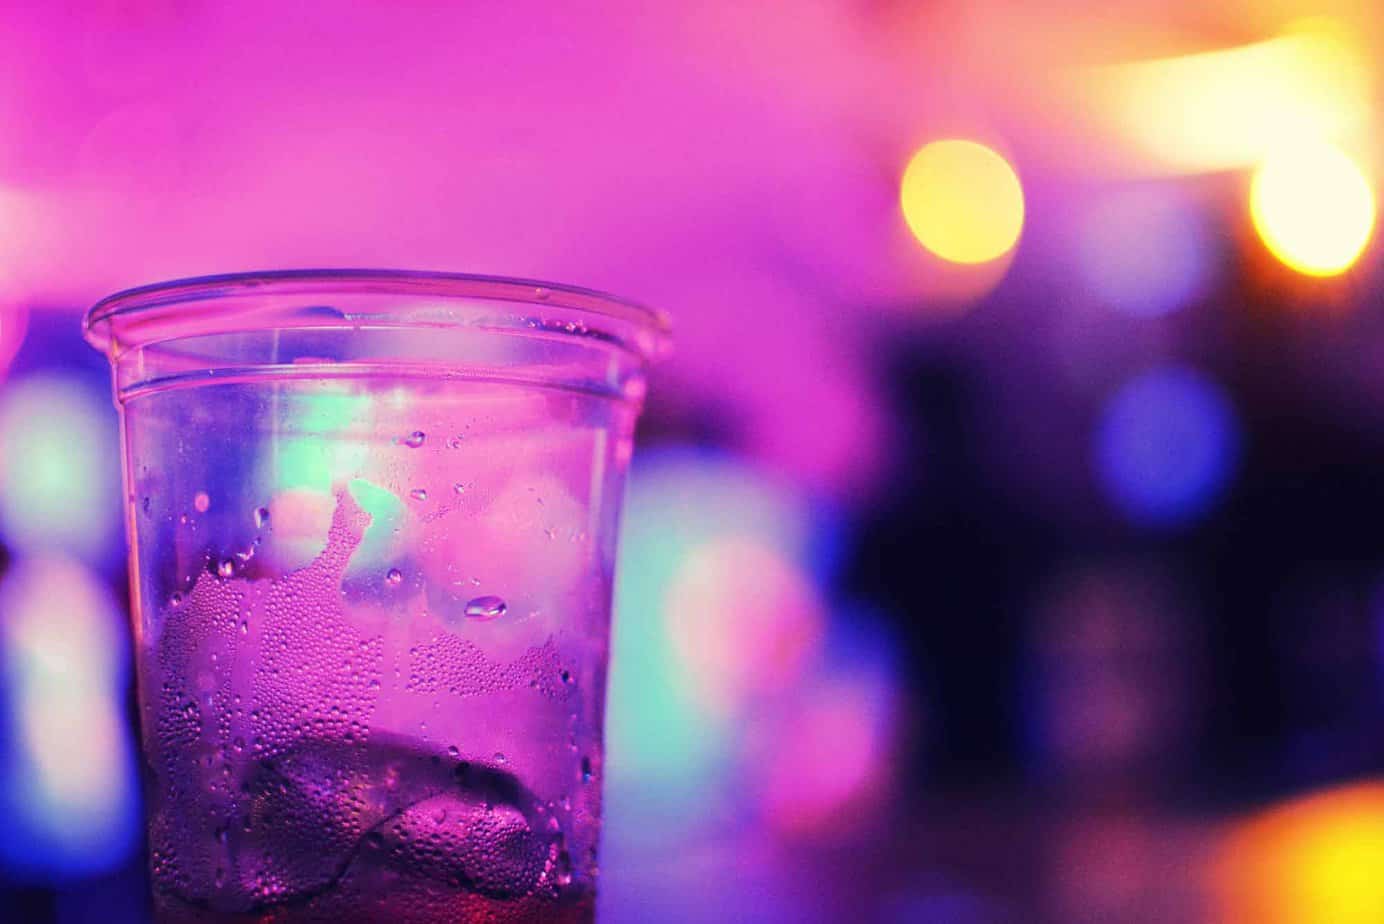 empty plastic cup with ice and condensation in purple lit room